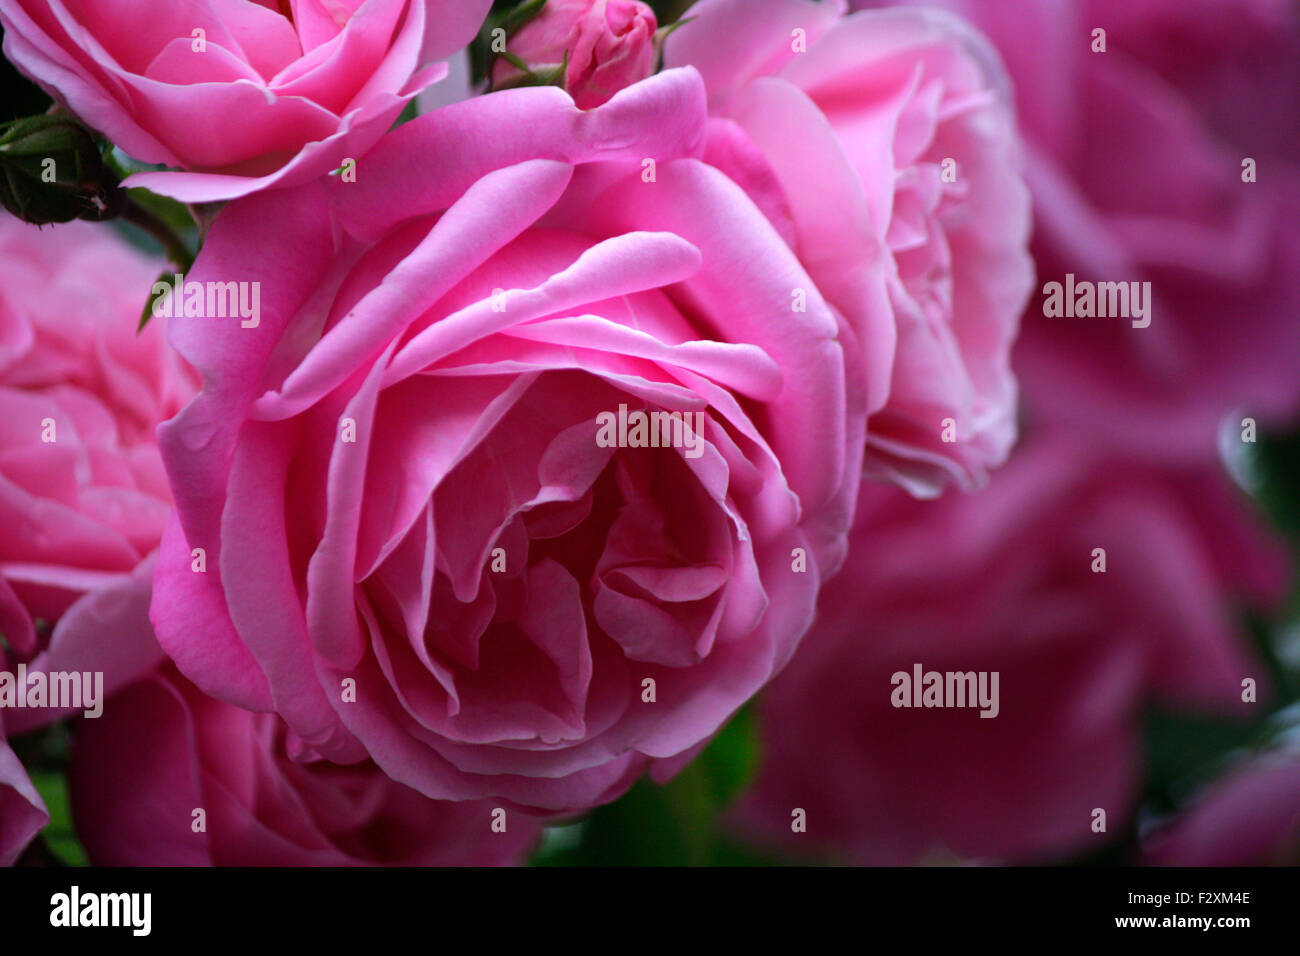 Page 2 - Rosa Rosen High Resolution Stock Photography and Images - Alamy